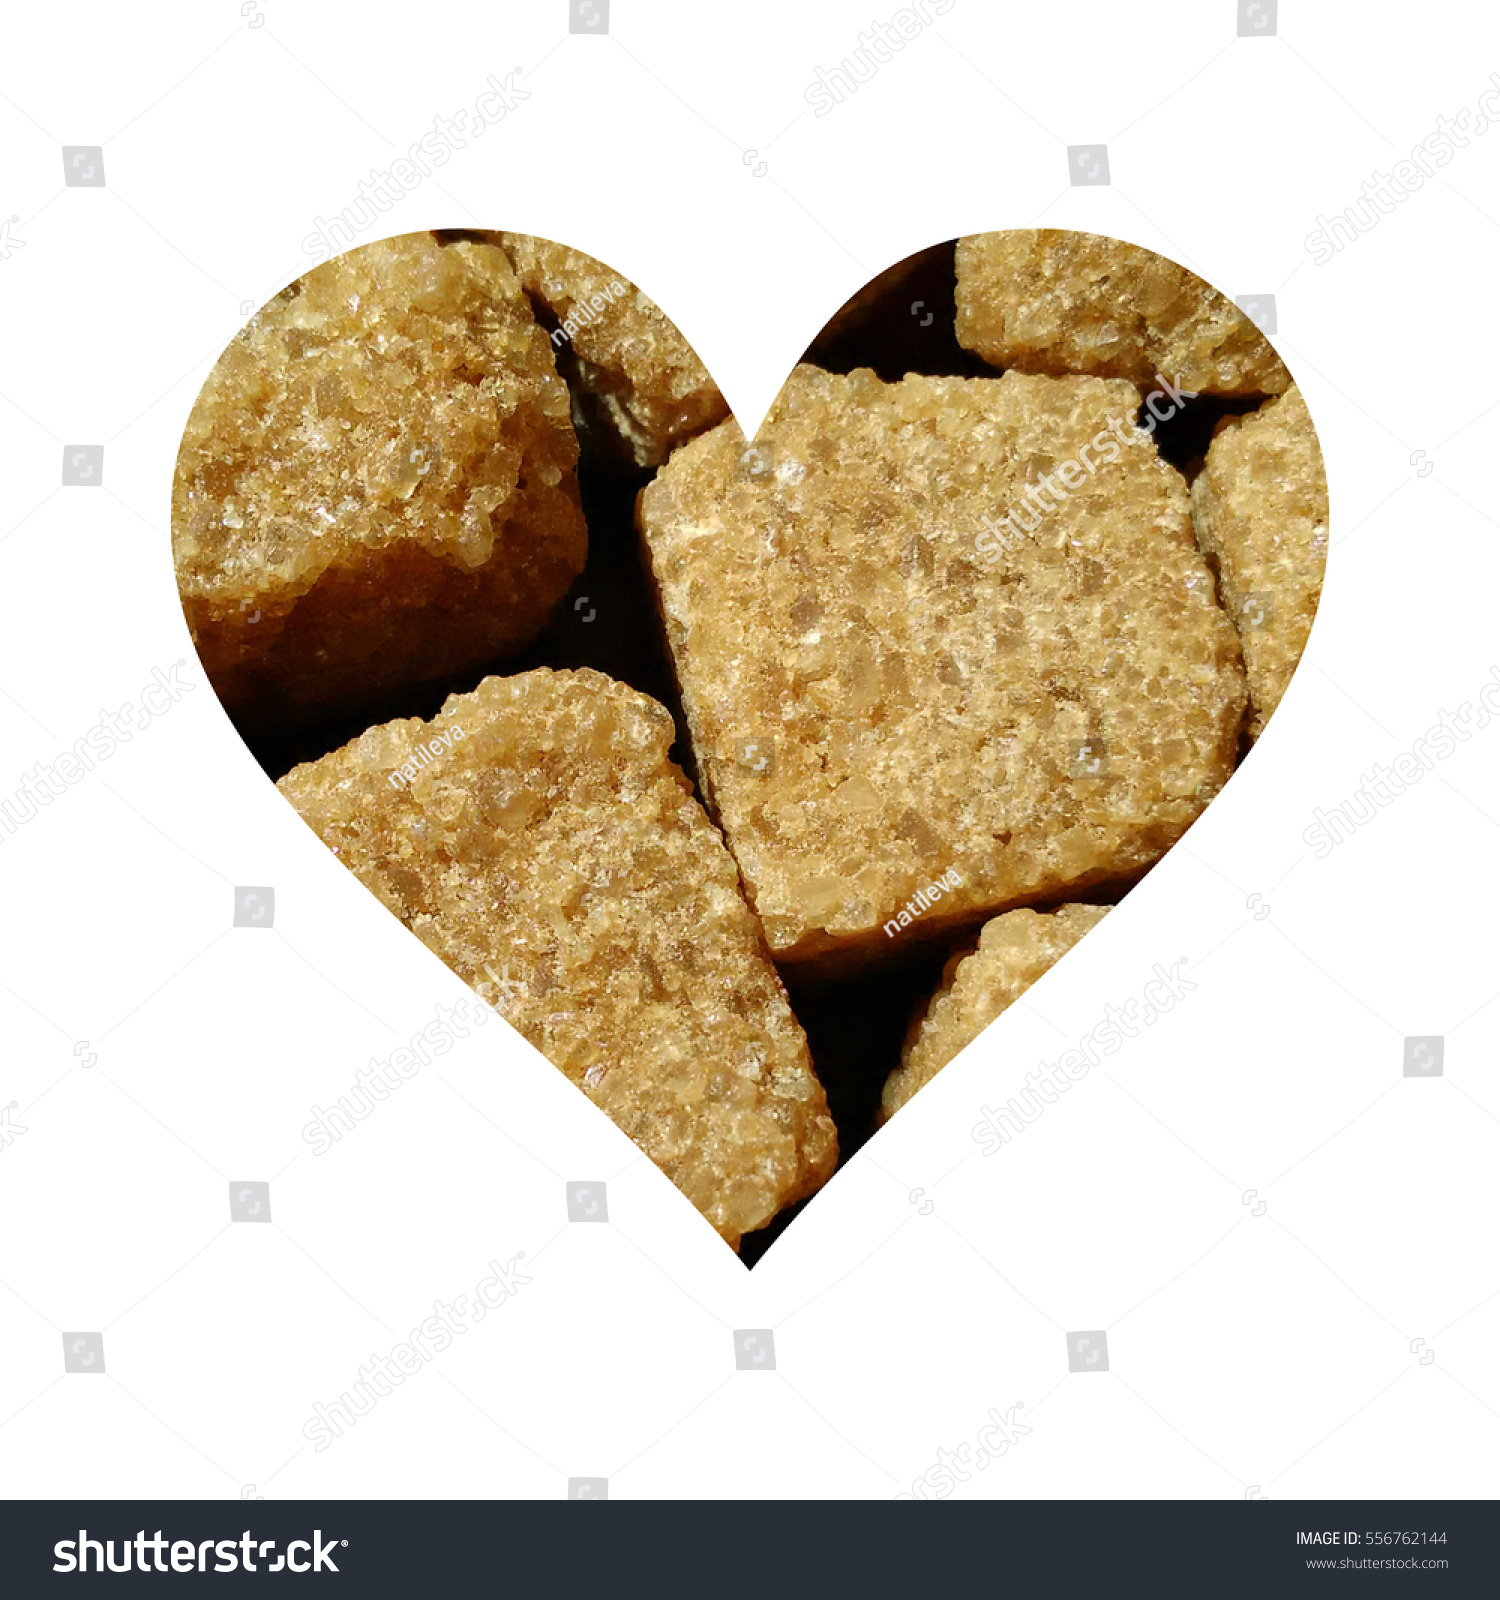 Simple heart form full of brown sugar cubes, on white background #556762144